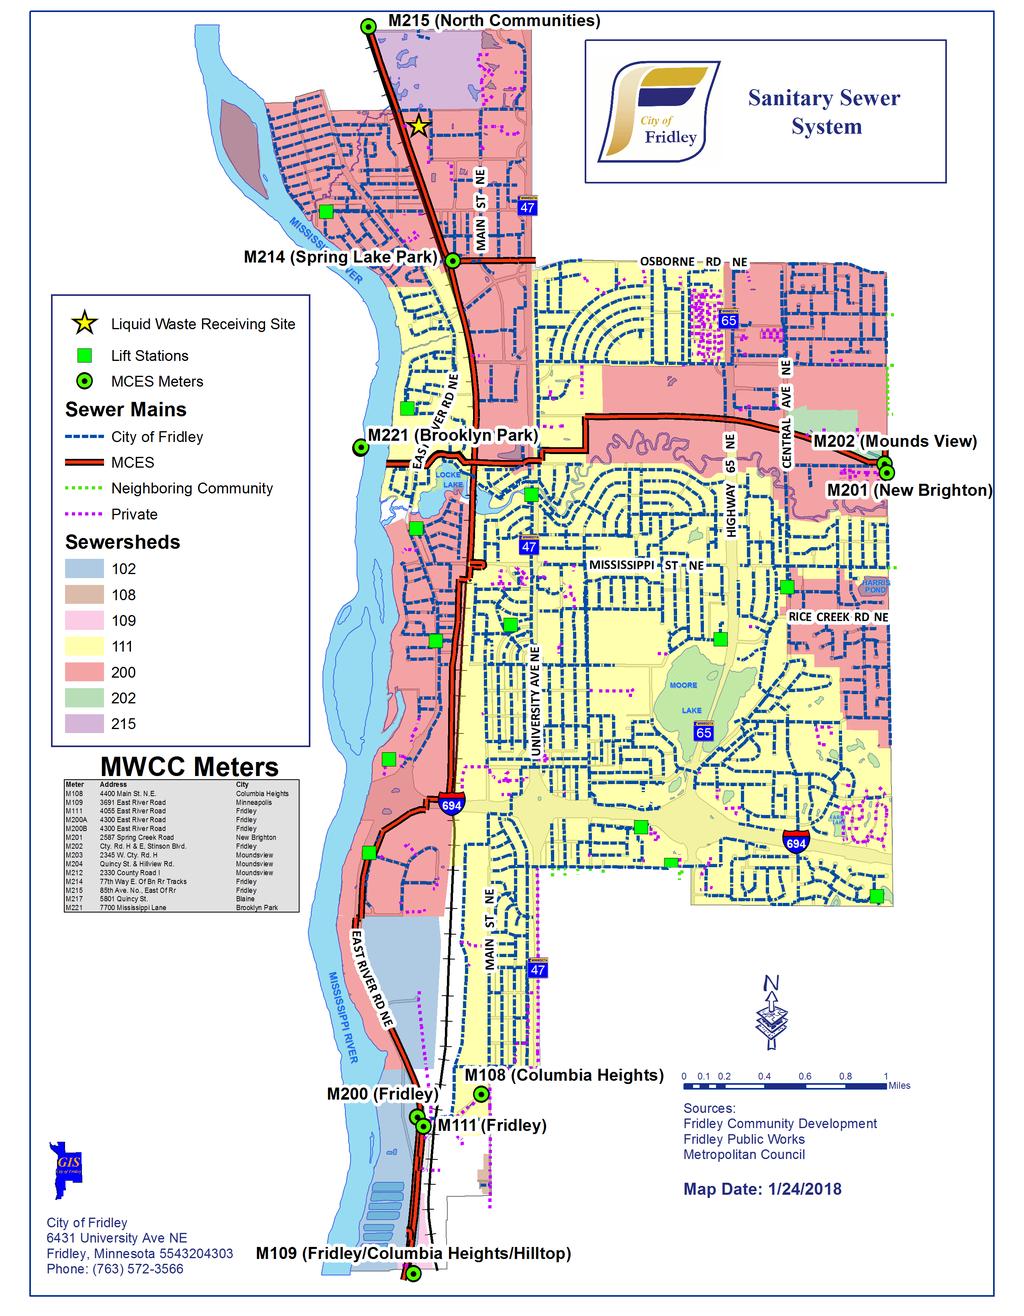 City System The City of Fridley owns and operates a separate sanitary sewer system that consists of approximately 542,750 linear feet of pipe varying in size from 4-inch diameter to 33-inch diameter.